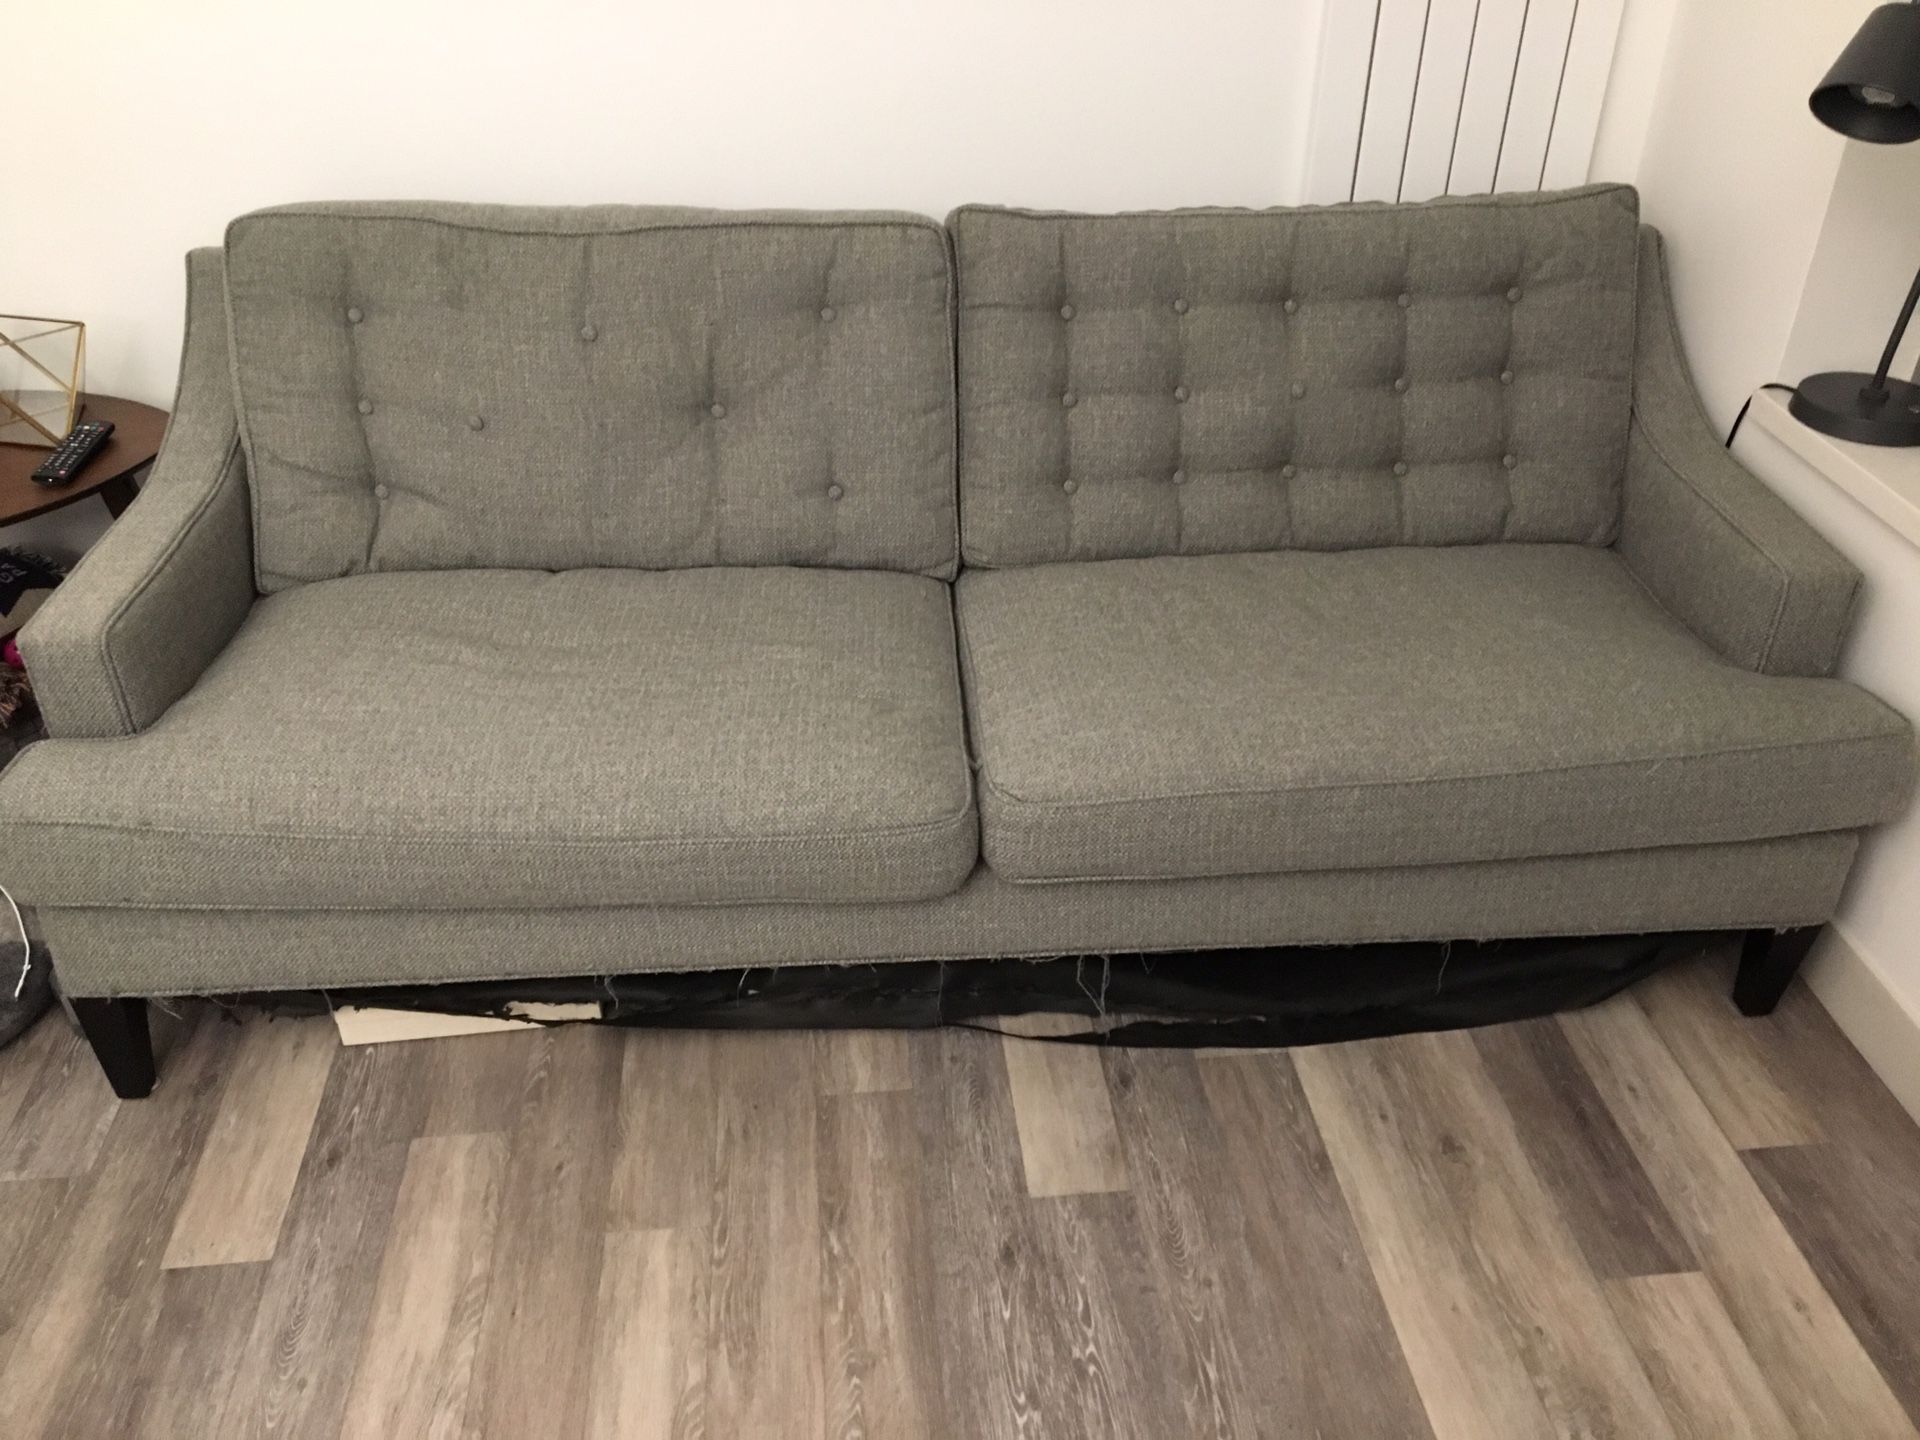 Mid-century modem tufted gray couch